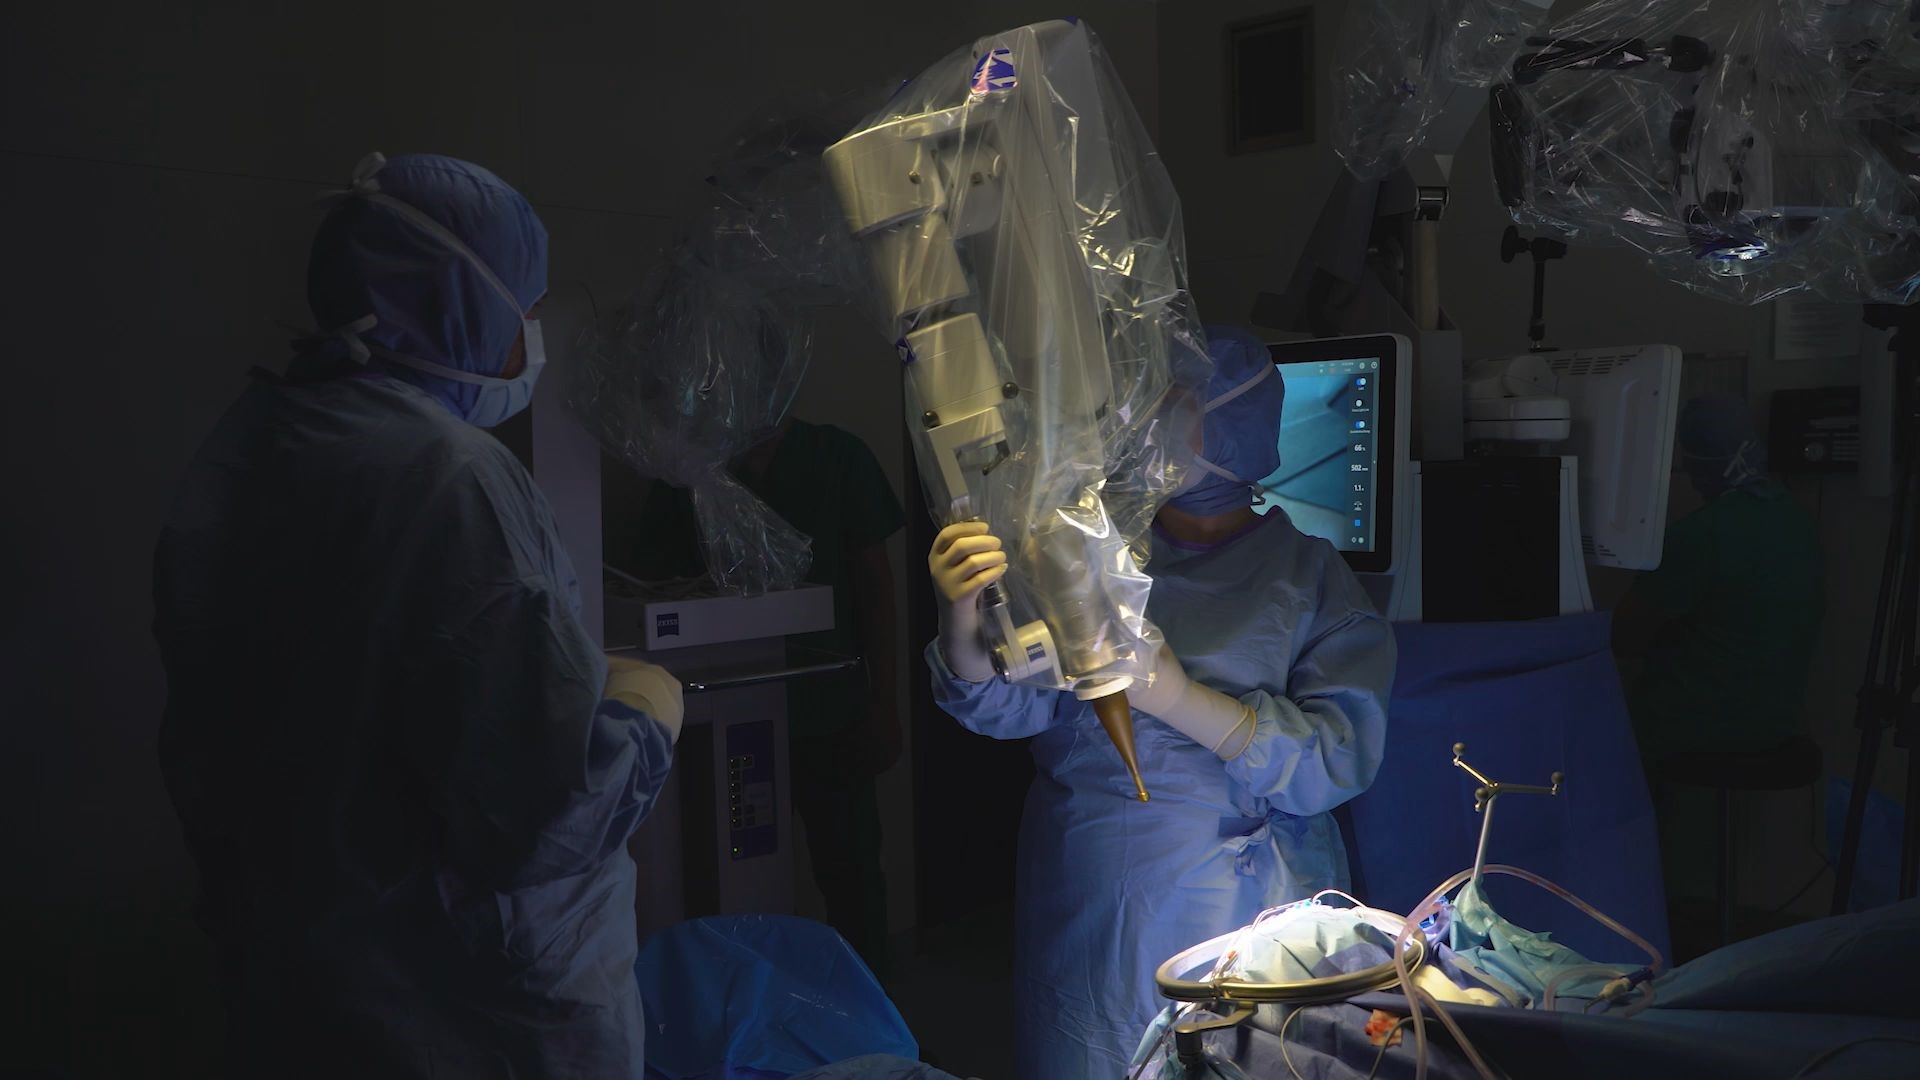 "This is the first time that intraoperative radiation has been used in the state outside of breast cancer," said one medical expert.